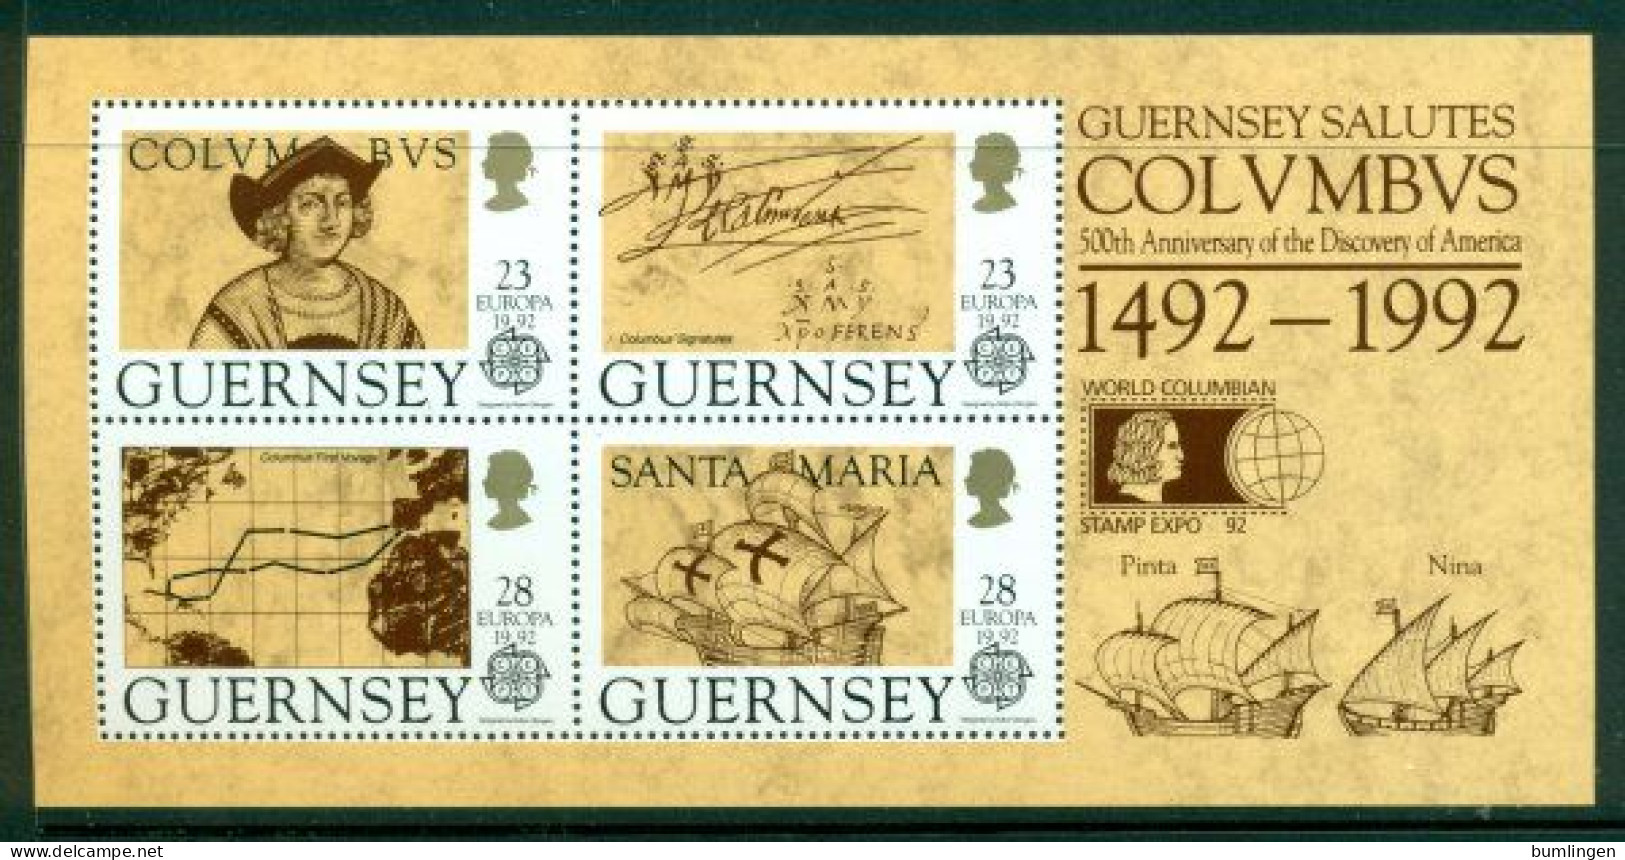 GUERNSEY 1992 Mi BL 8 I** Europa CEPT - 500th Anniversary Of The Discovery Of America – World Columbian Stamp Expo [B498 - 1992